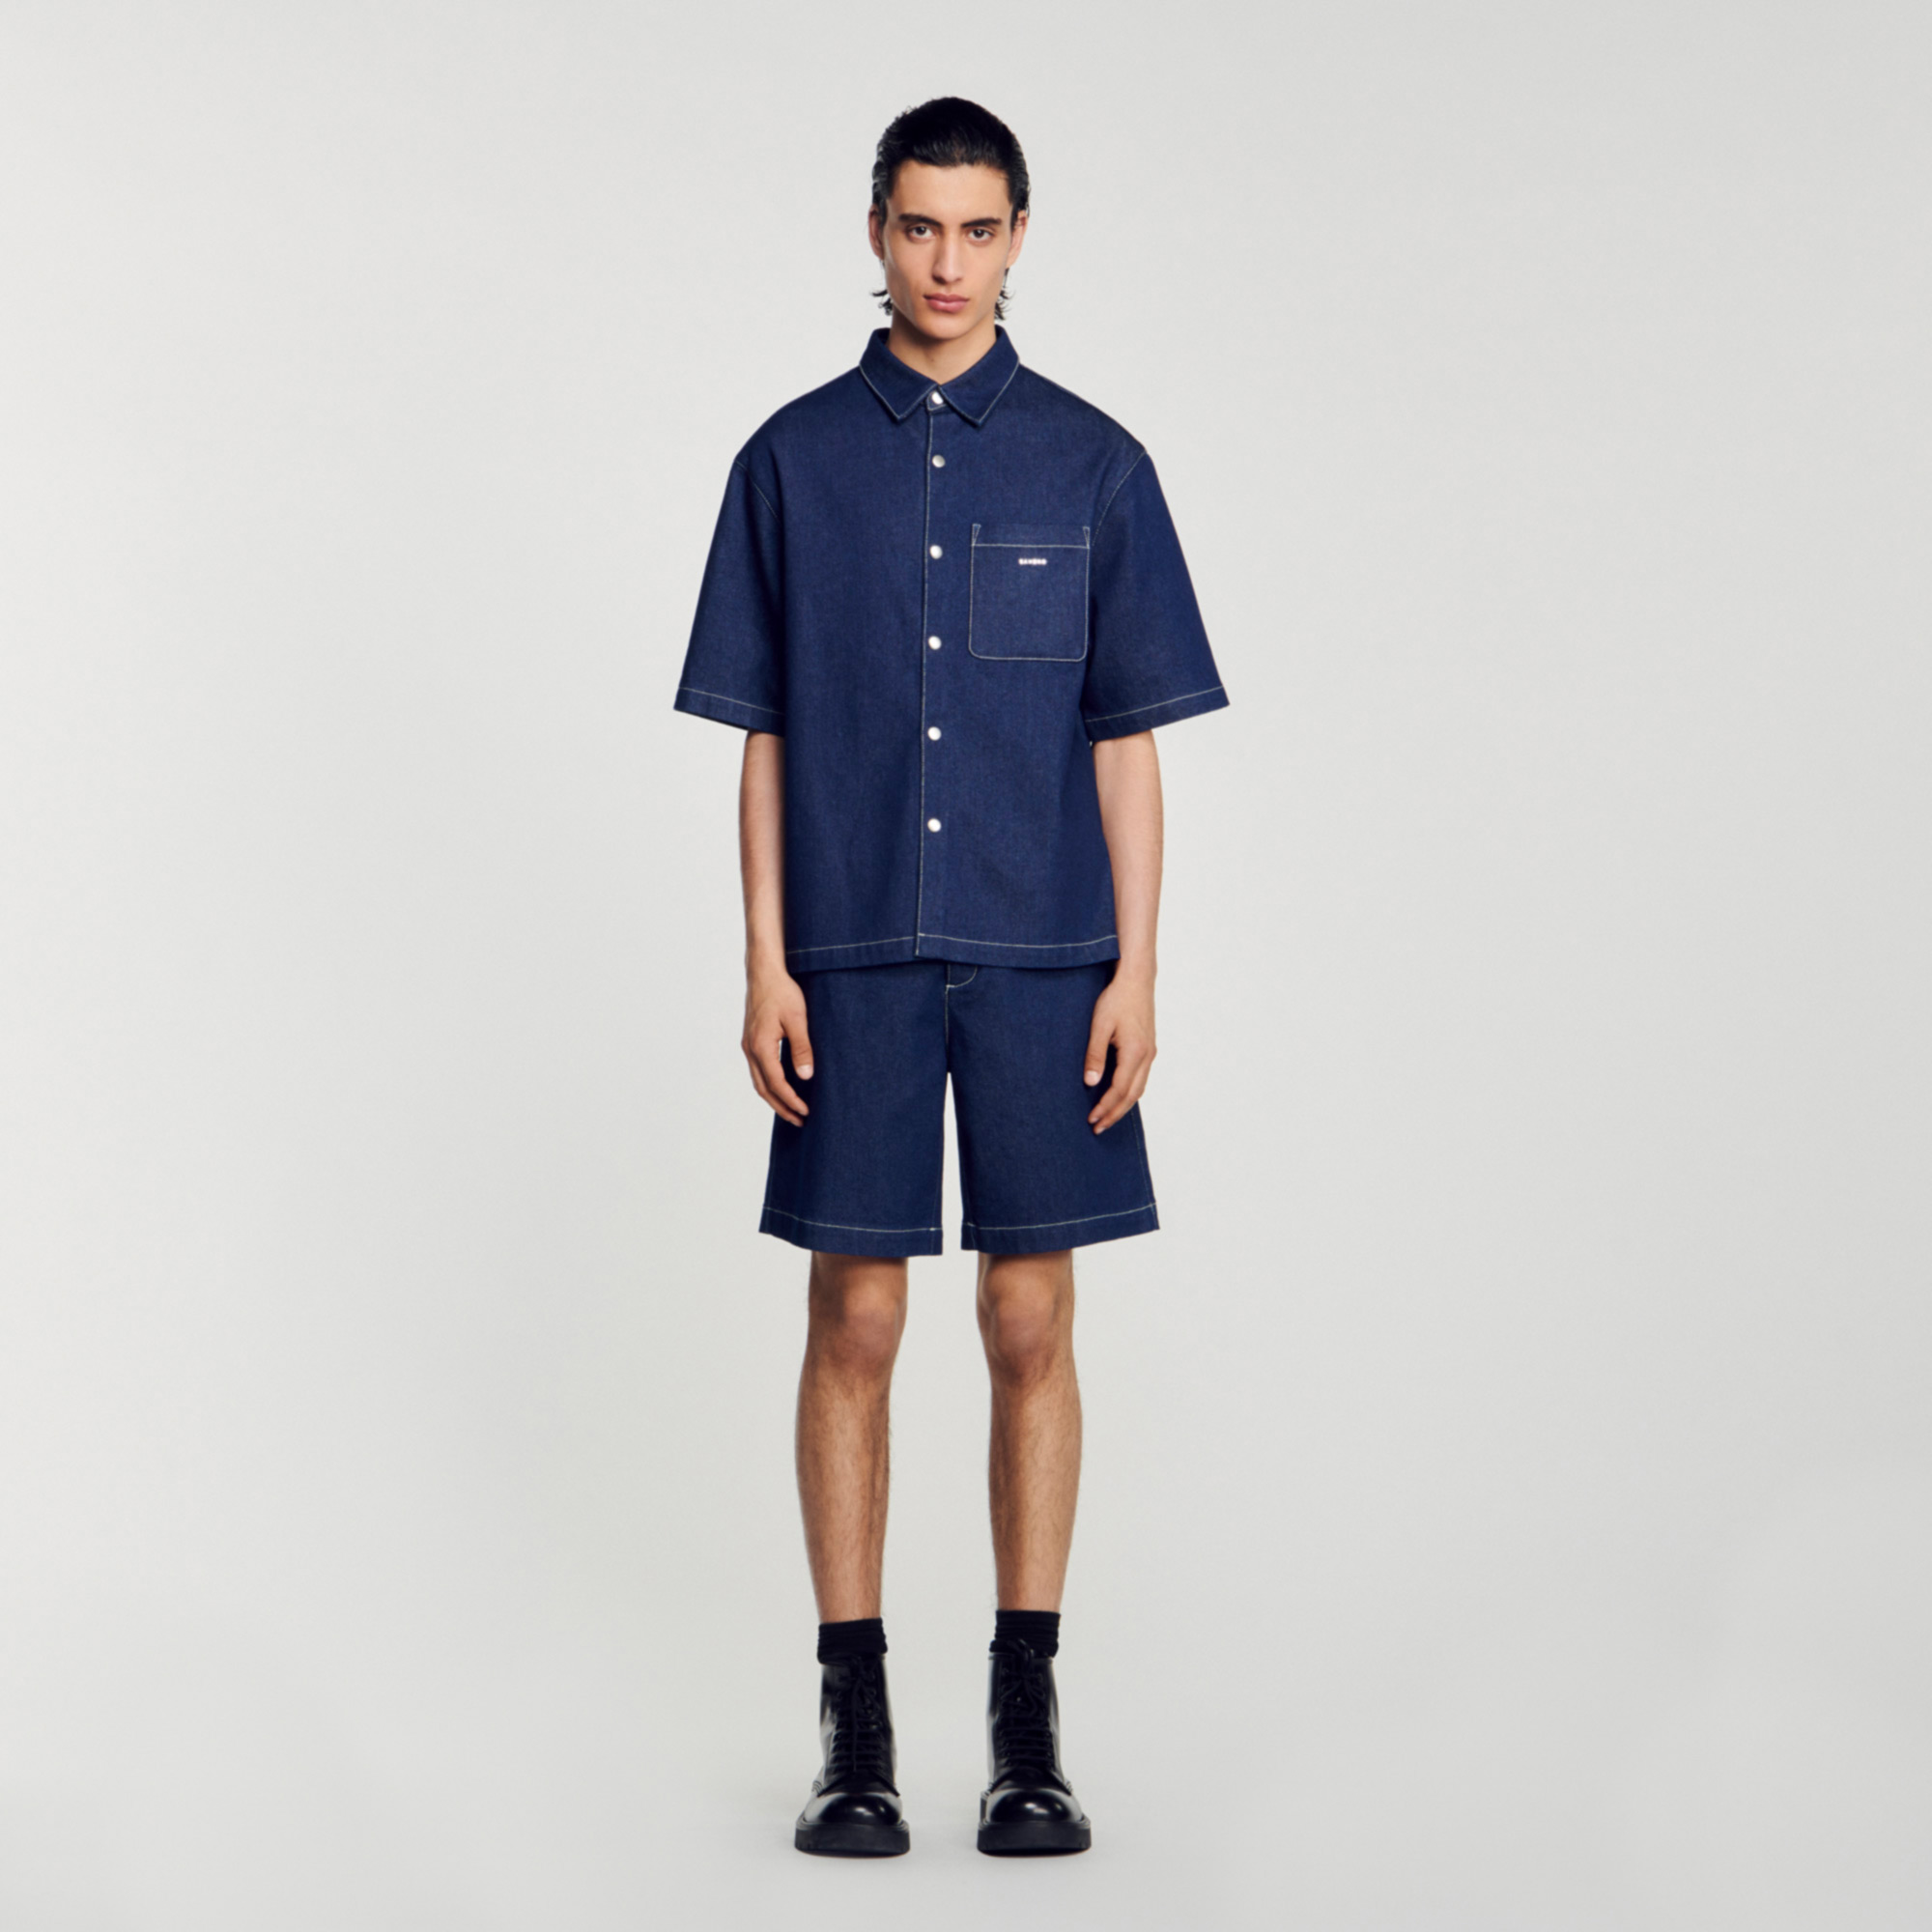 Sandro cotton Untreated denim shirt with a classic collar, short sleeves, a button fastening, and a pocket on the chest